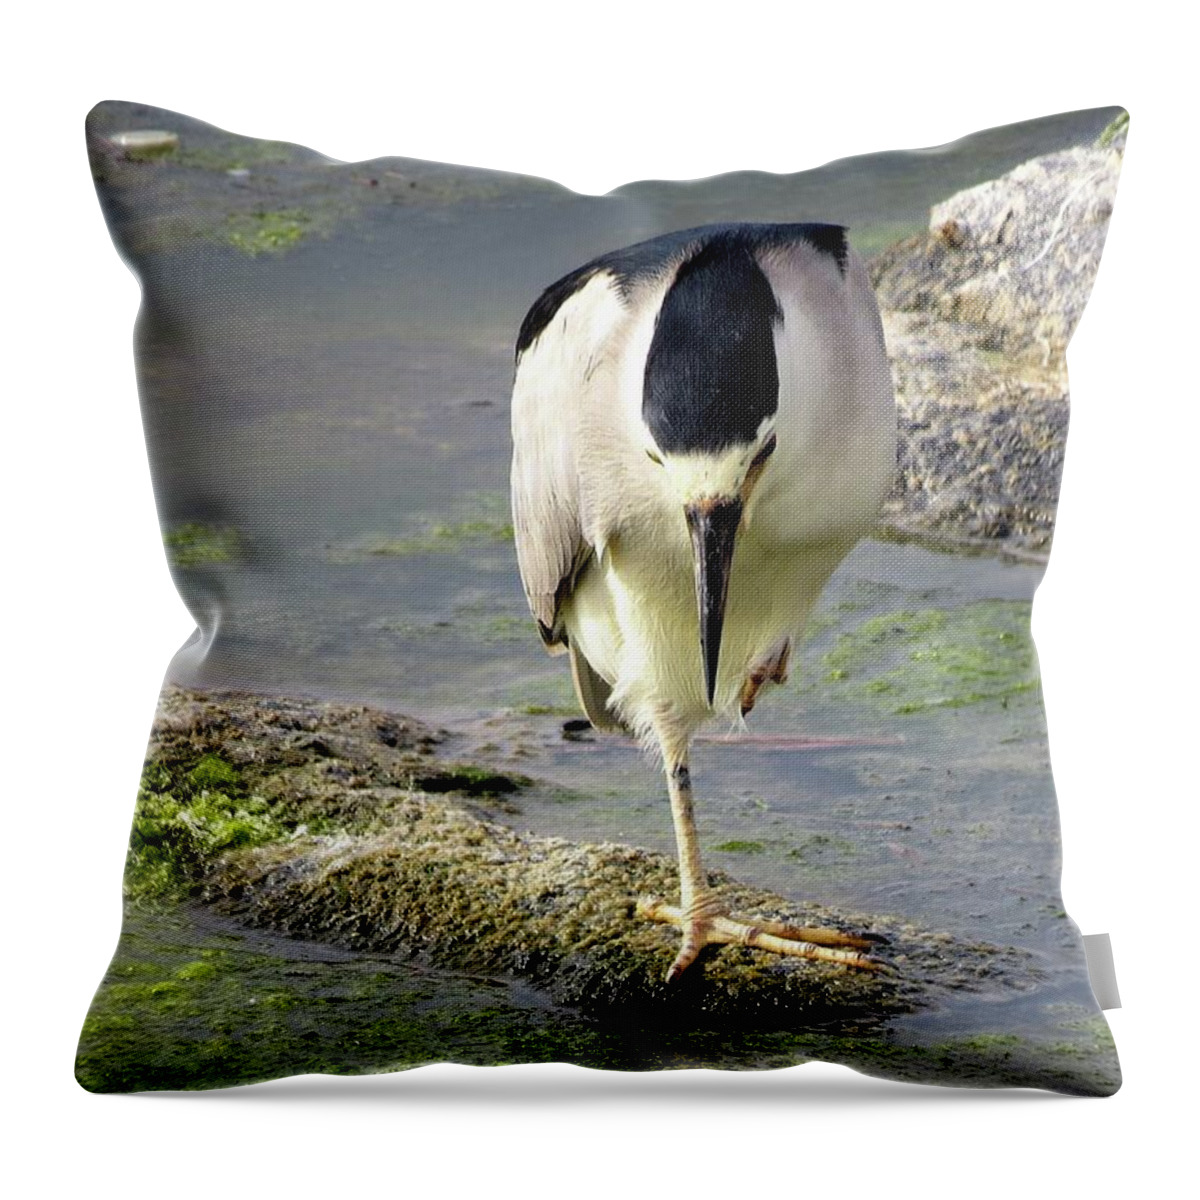 Birds Throw Pillow featuring the photograph Balance by Linda Stern